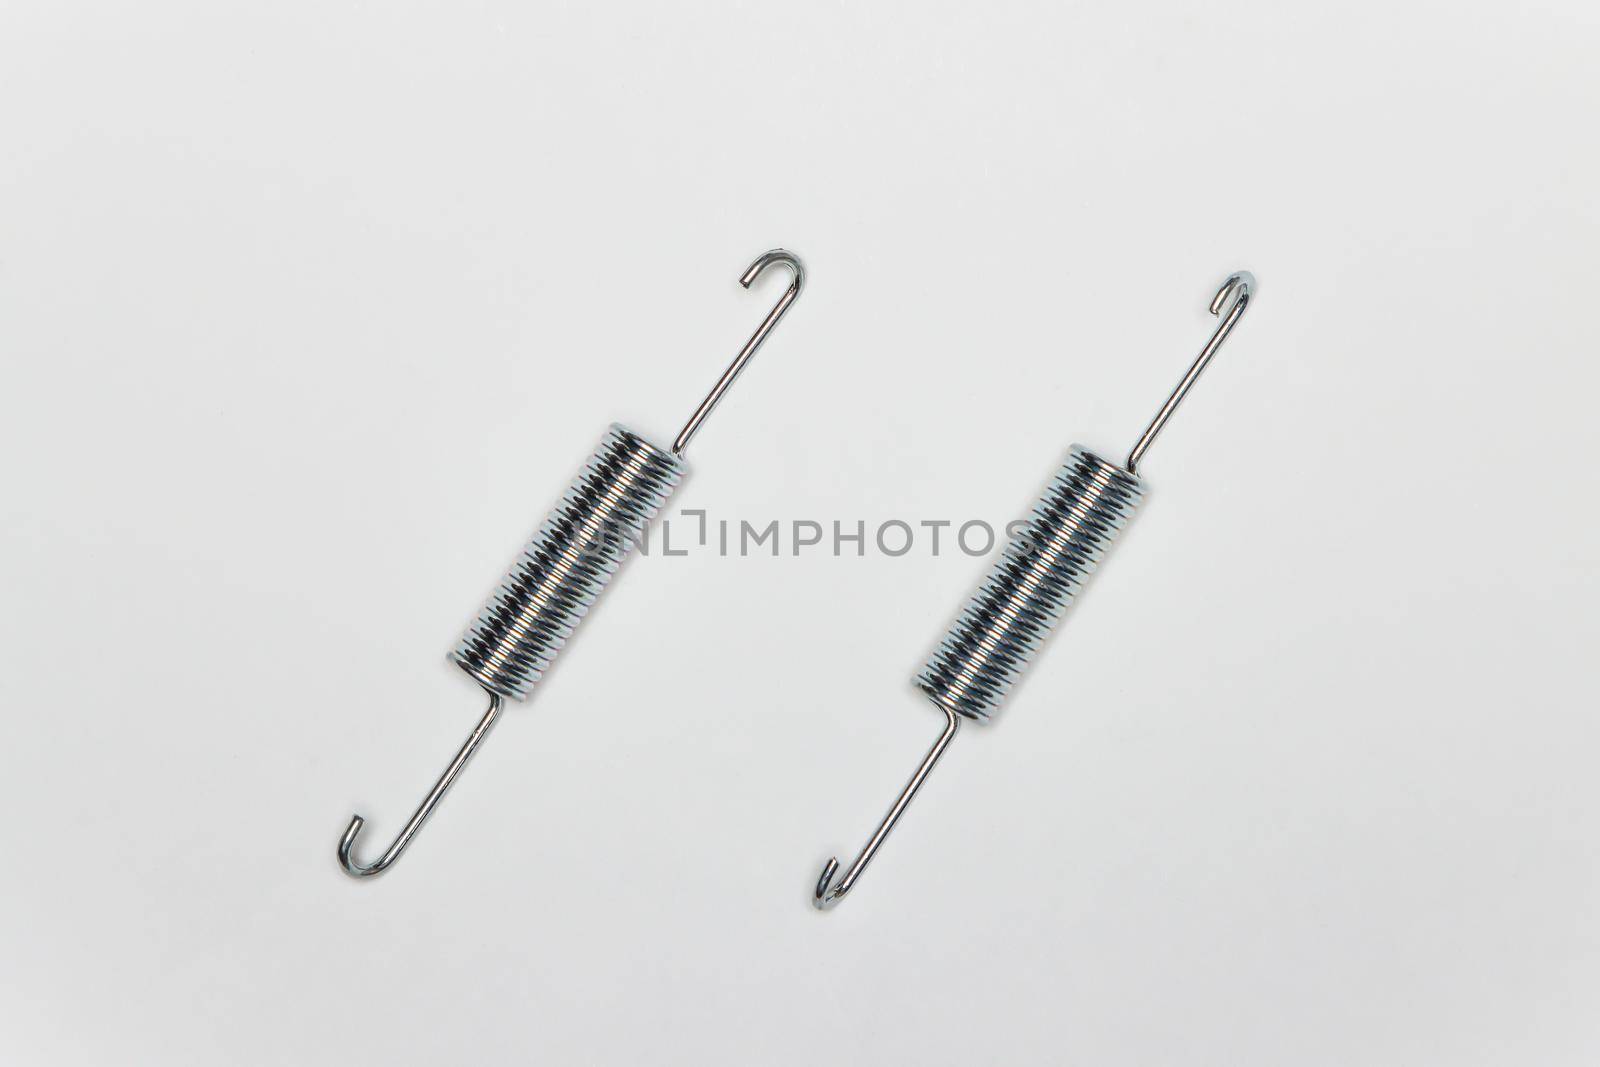 Two long springs for repairing the brakes of the machine. Set of spare parts for car brake repair. Details on white background, copy space available. UHD 4K.